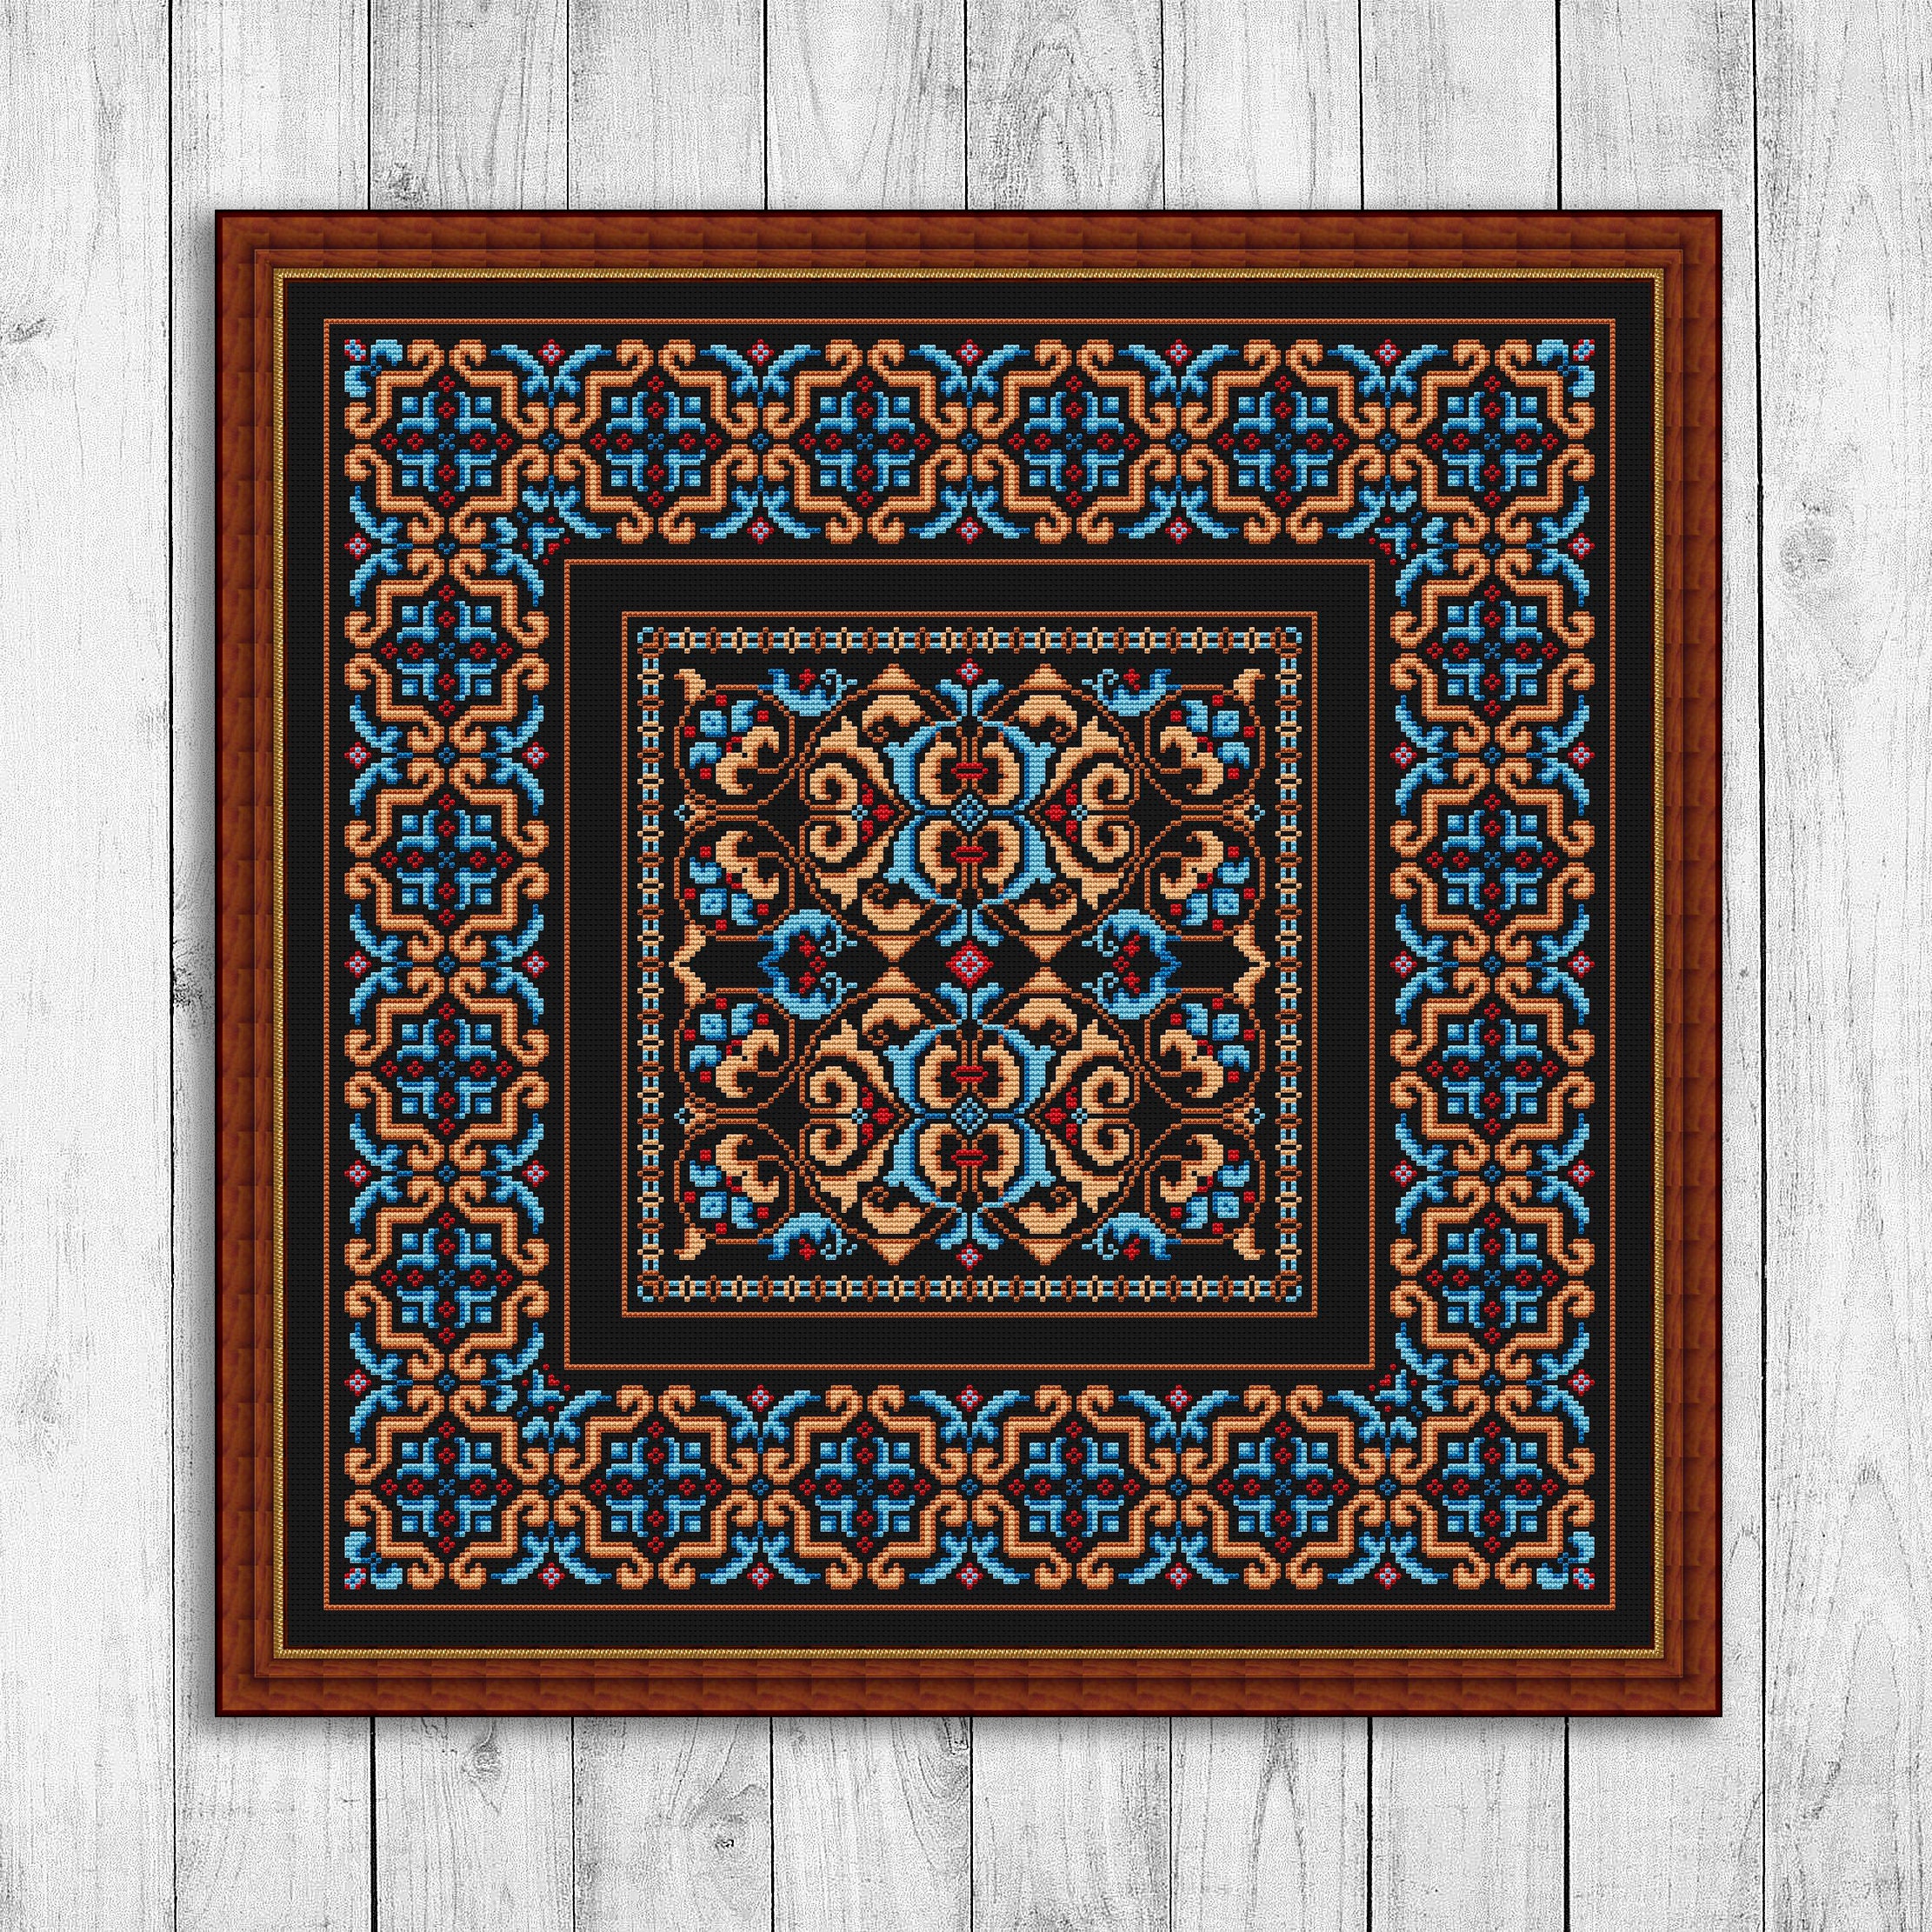 Carpet Cross Stitch Pattern, Ornament Counted Cross Stitch Chart, Sampler,  Pillow,modern Embroidery, Christmas Decor, Instant Download PDF 